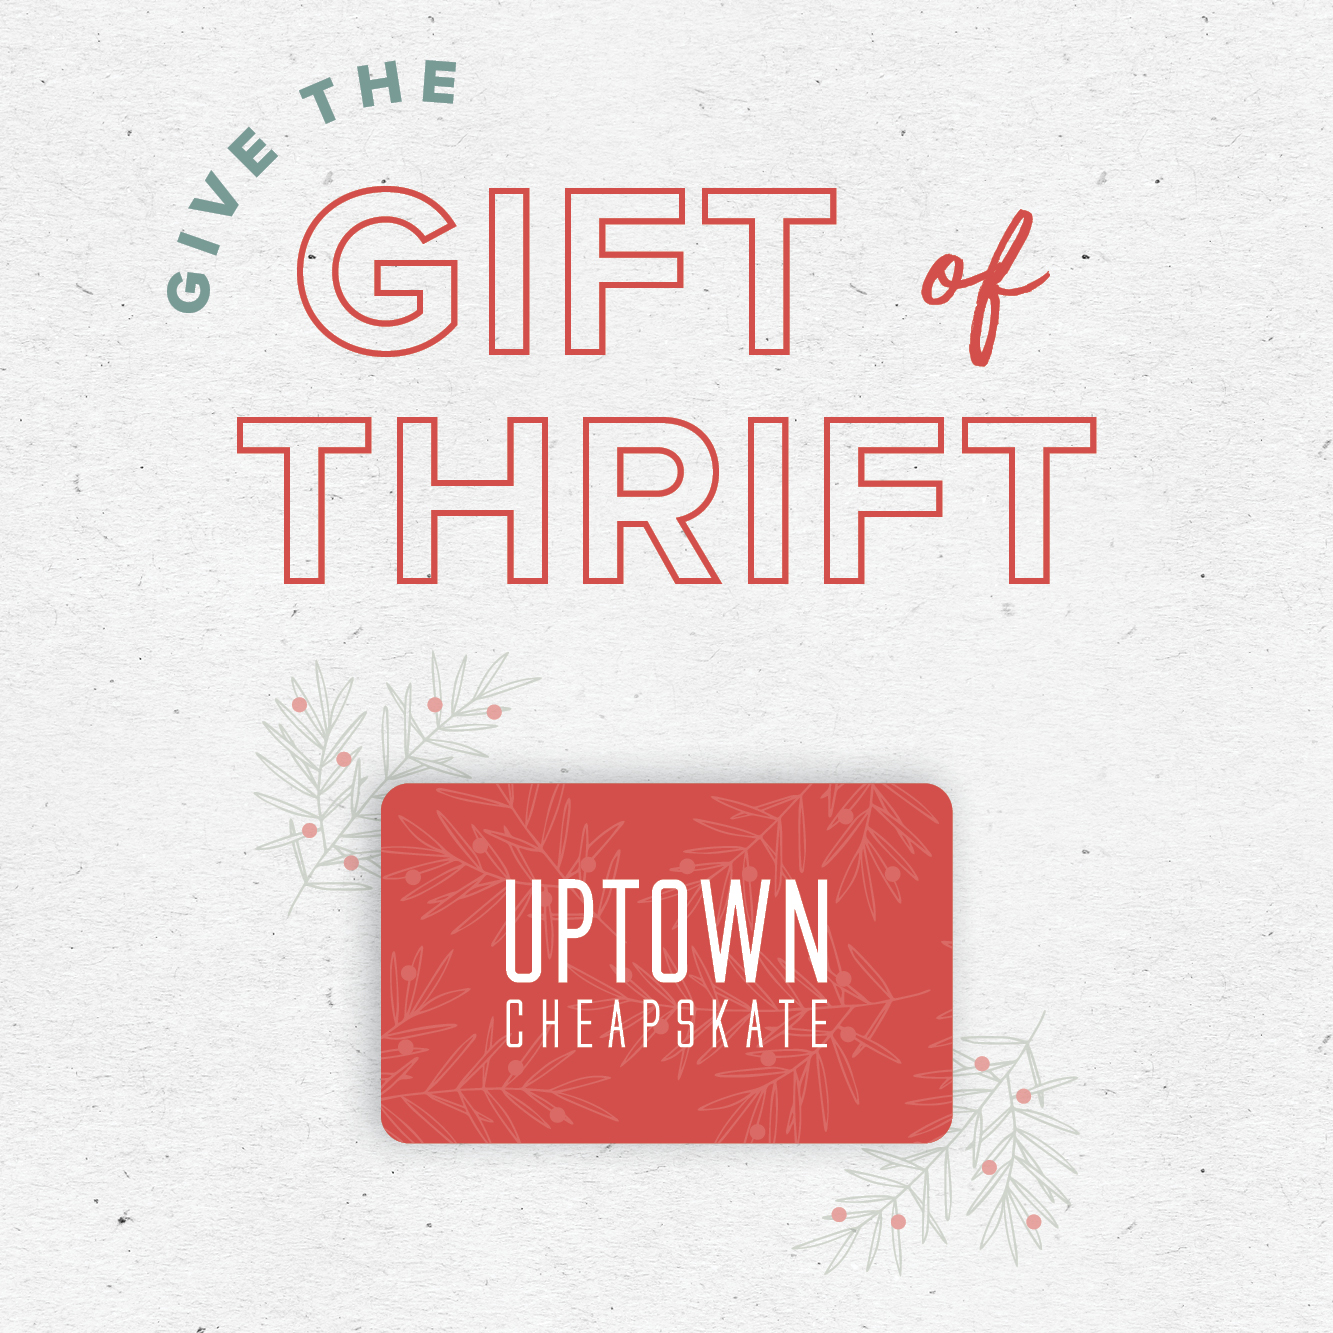 Gift of Thrift - Social_Web Graphic_1000x1000 - UC - Q4.2022